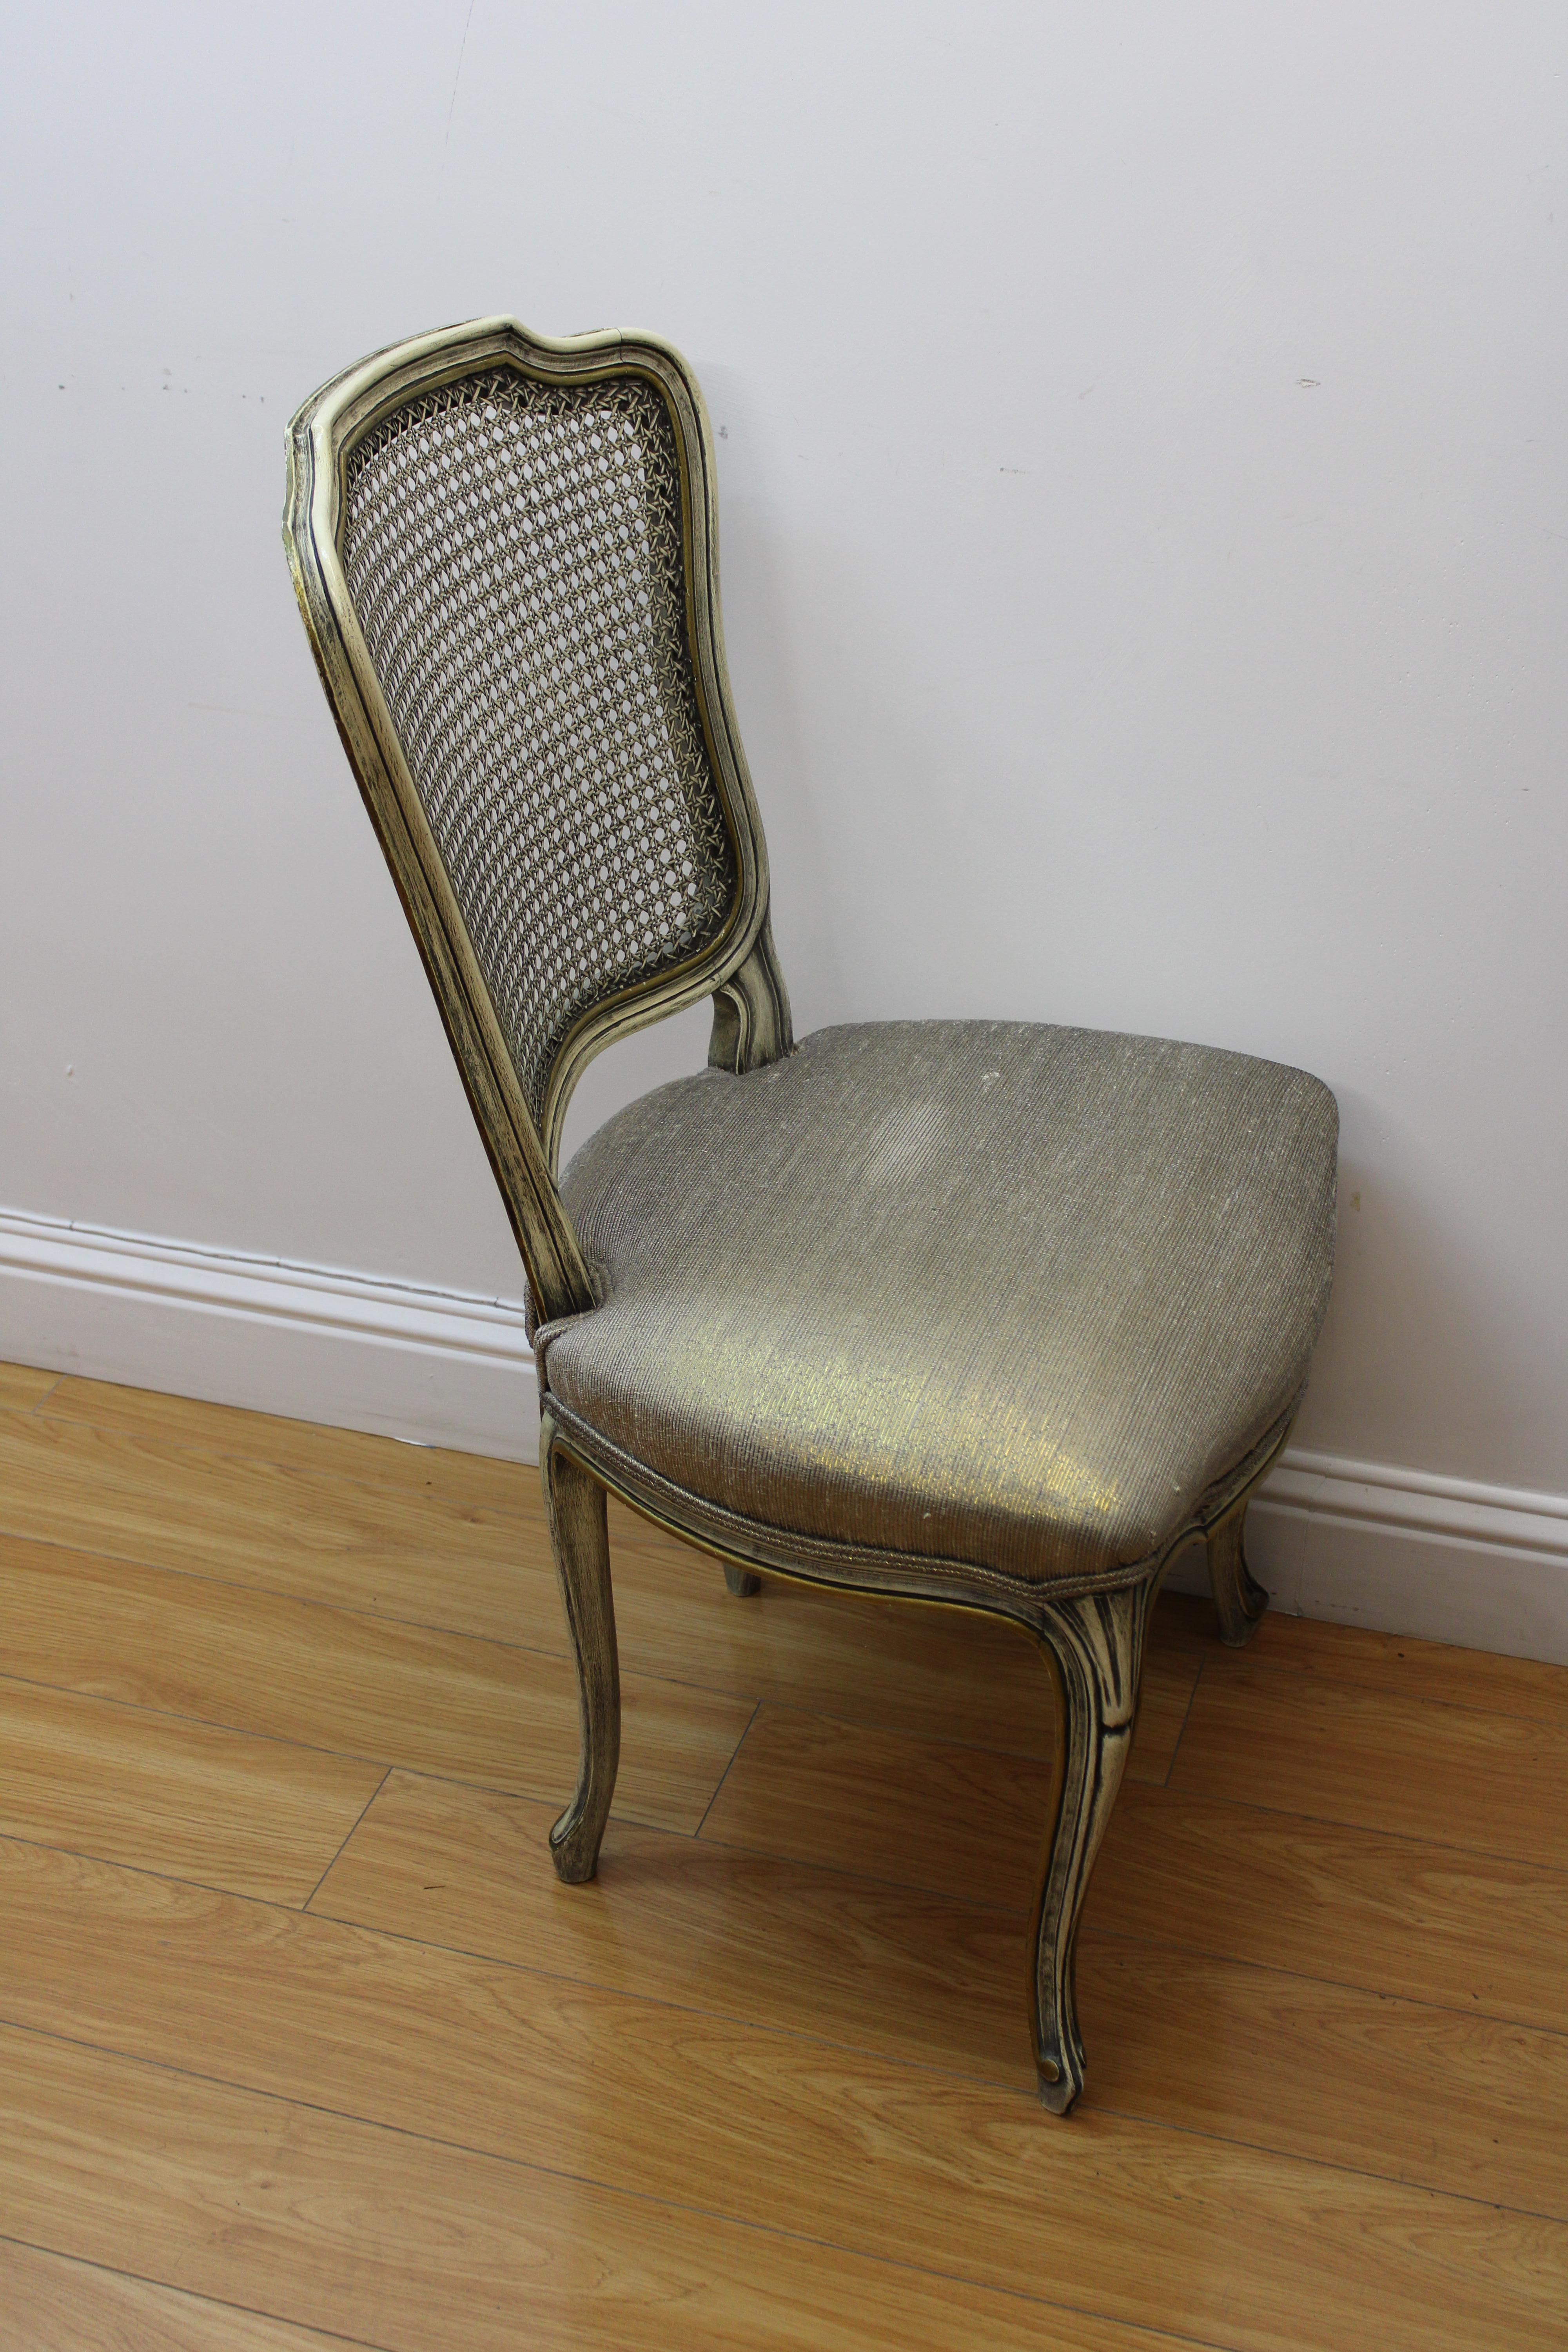 20th Century French Carved Side Chairs w/ Caned Backs & Upholstered Seats For Sale